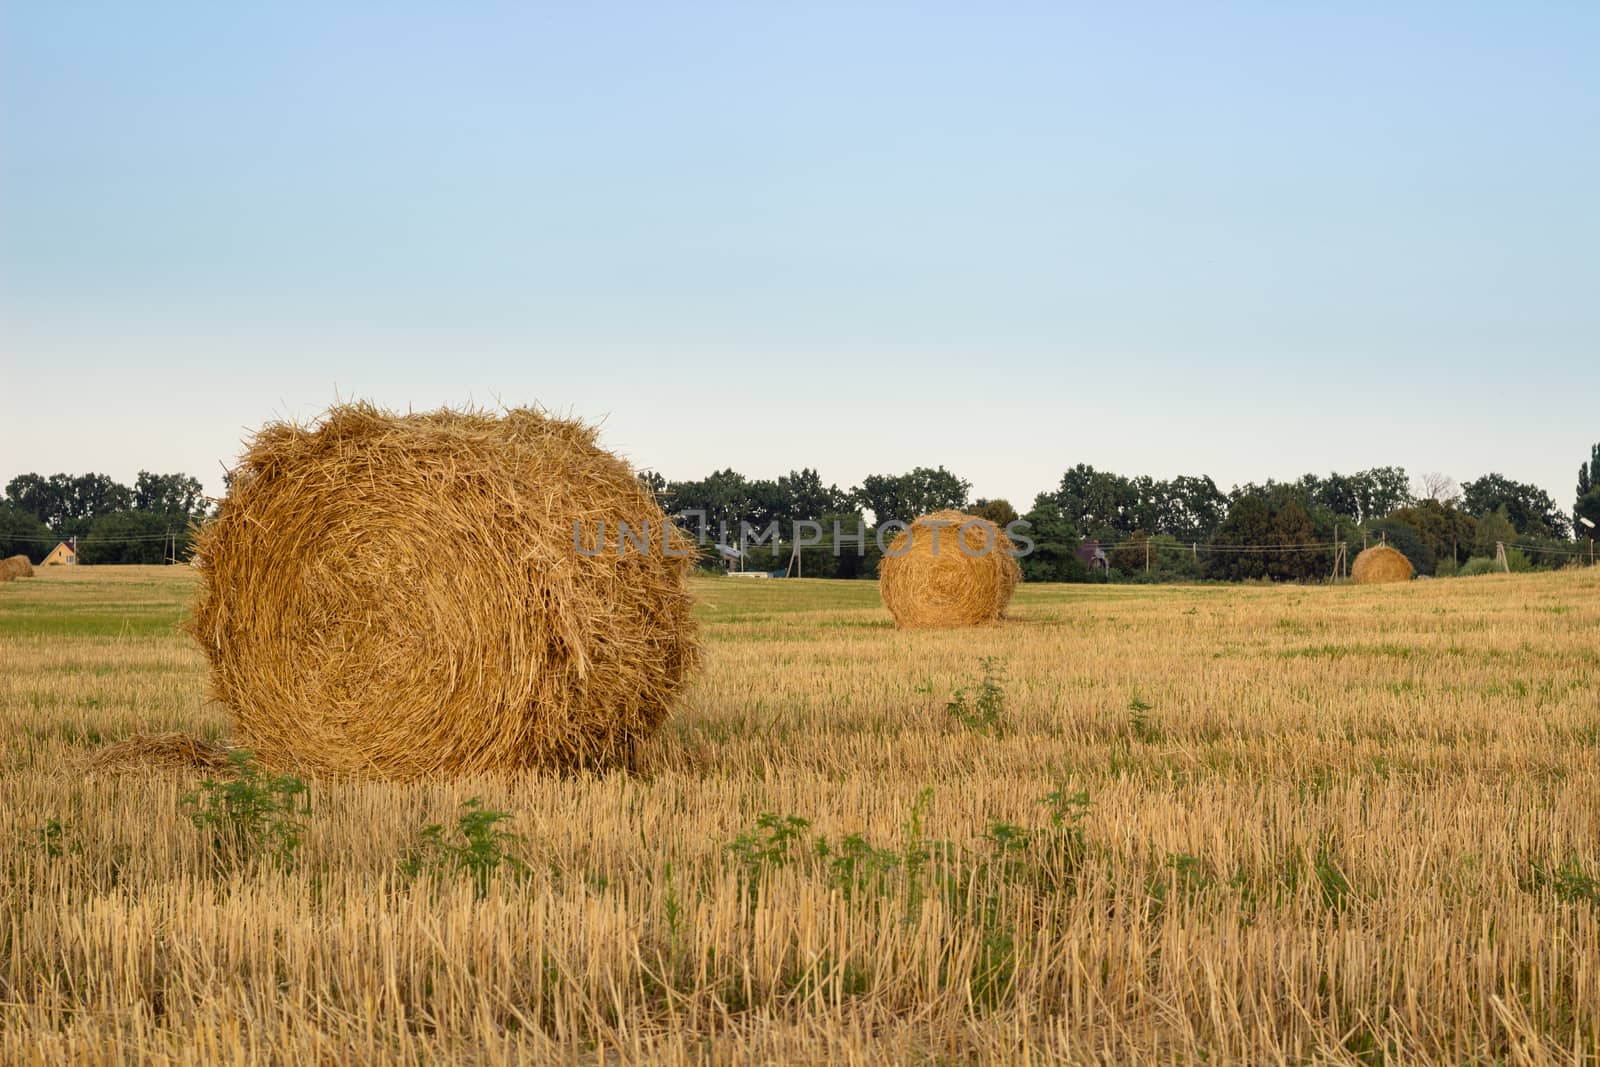 Dry hay stacks on countryside field during harvest time